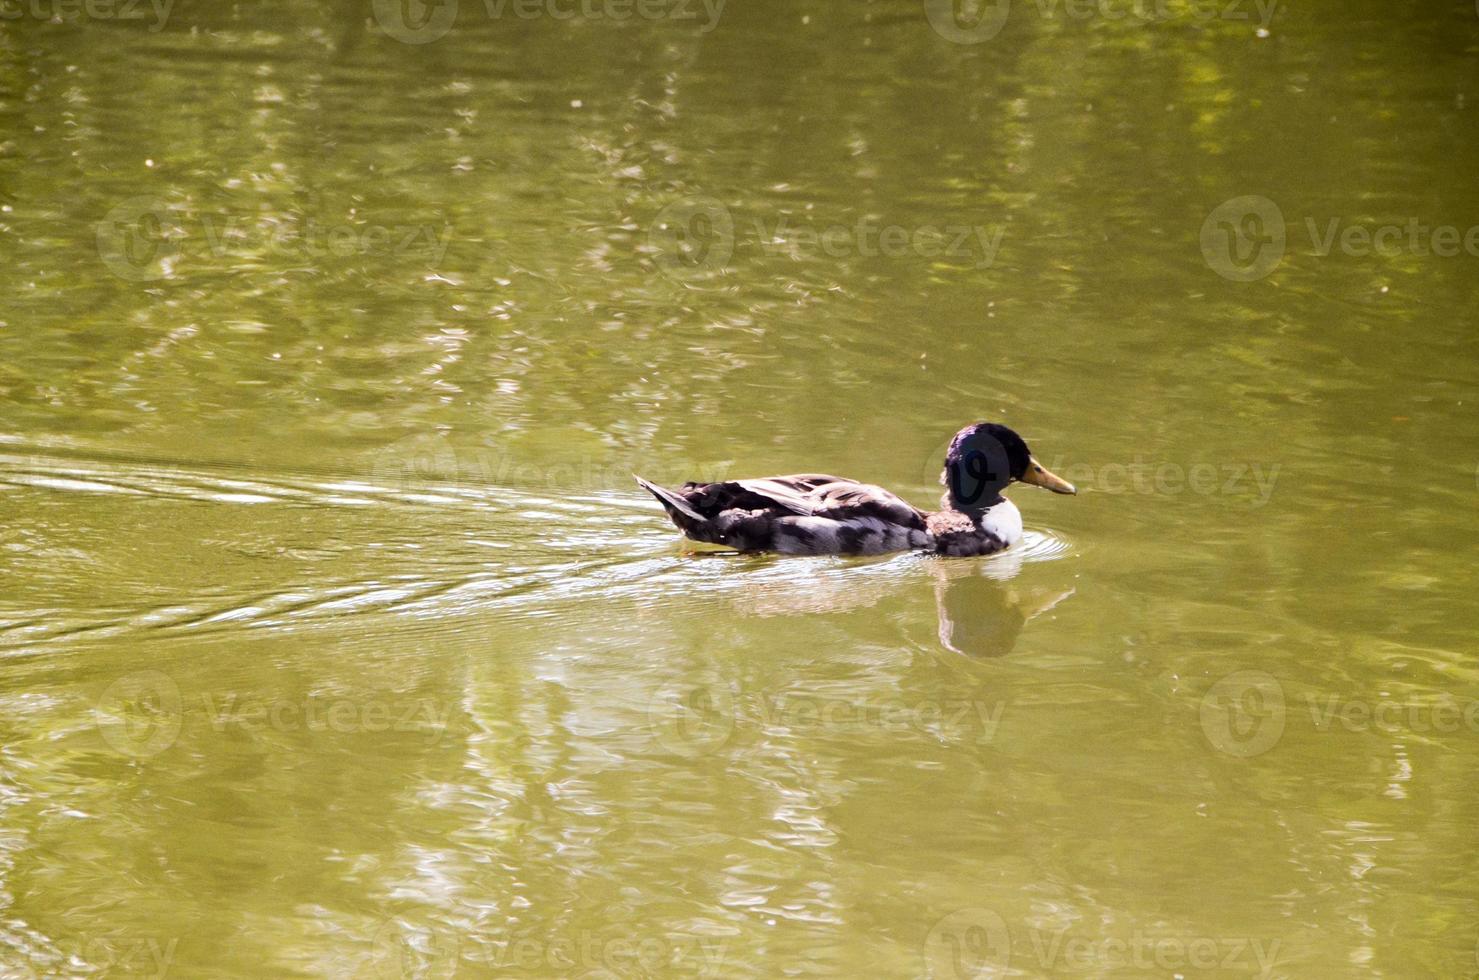 A duck swimming in the pond photo